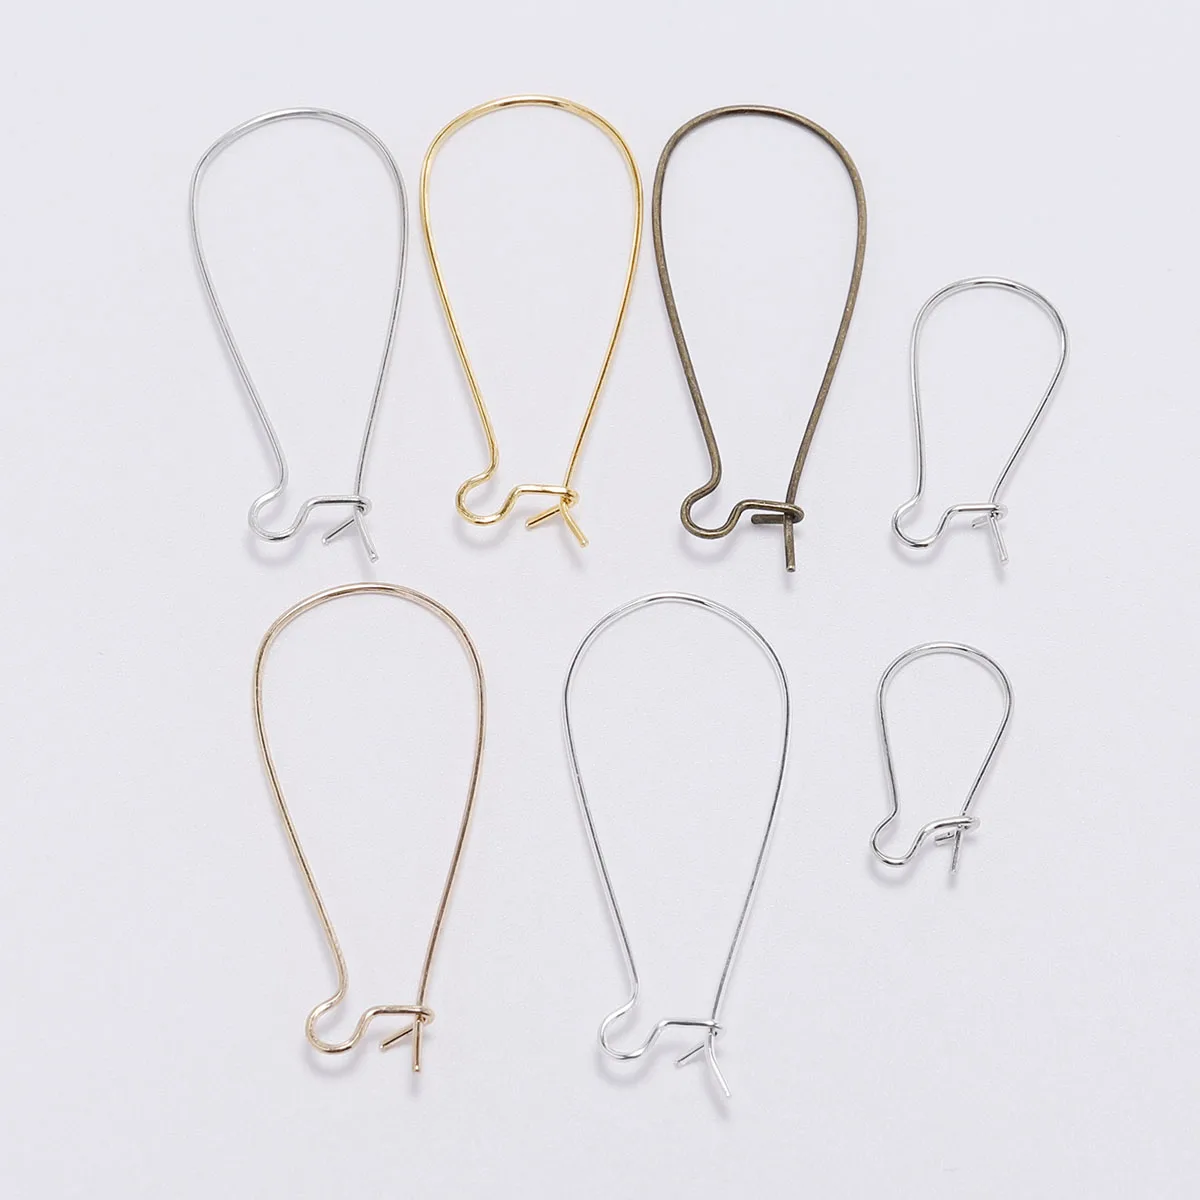 20Pcs Kidney Ear Wire Fish Hooks with Clasp Earring Lever Back Silver/Bronze